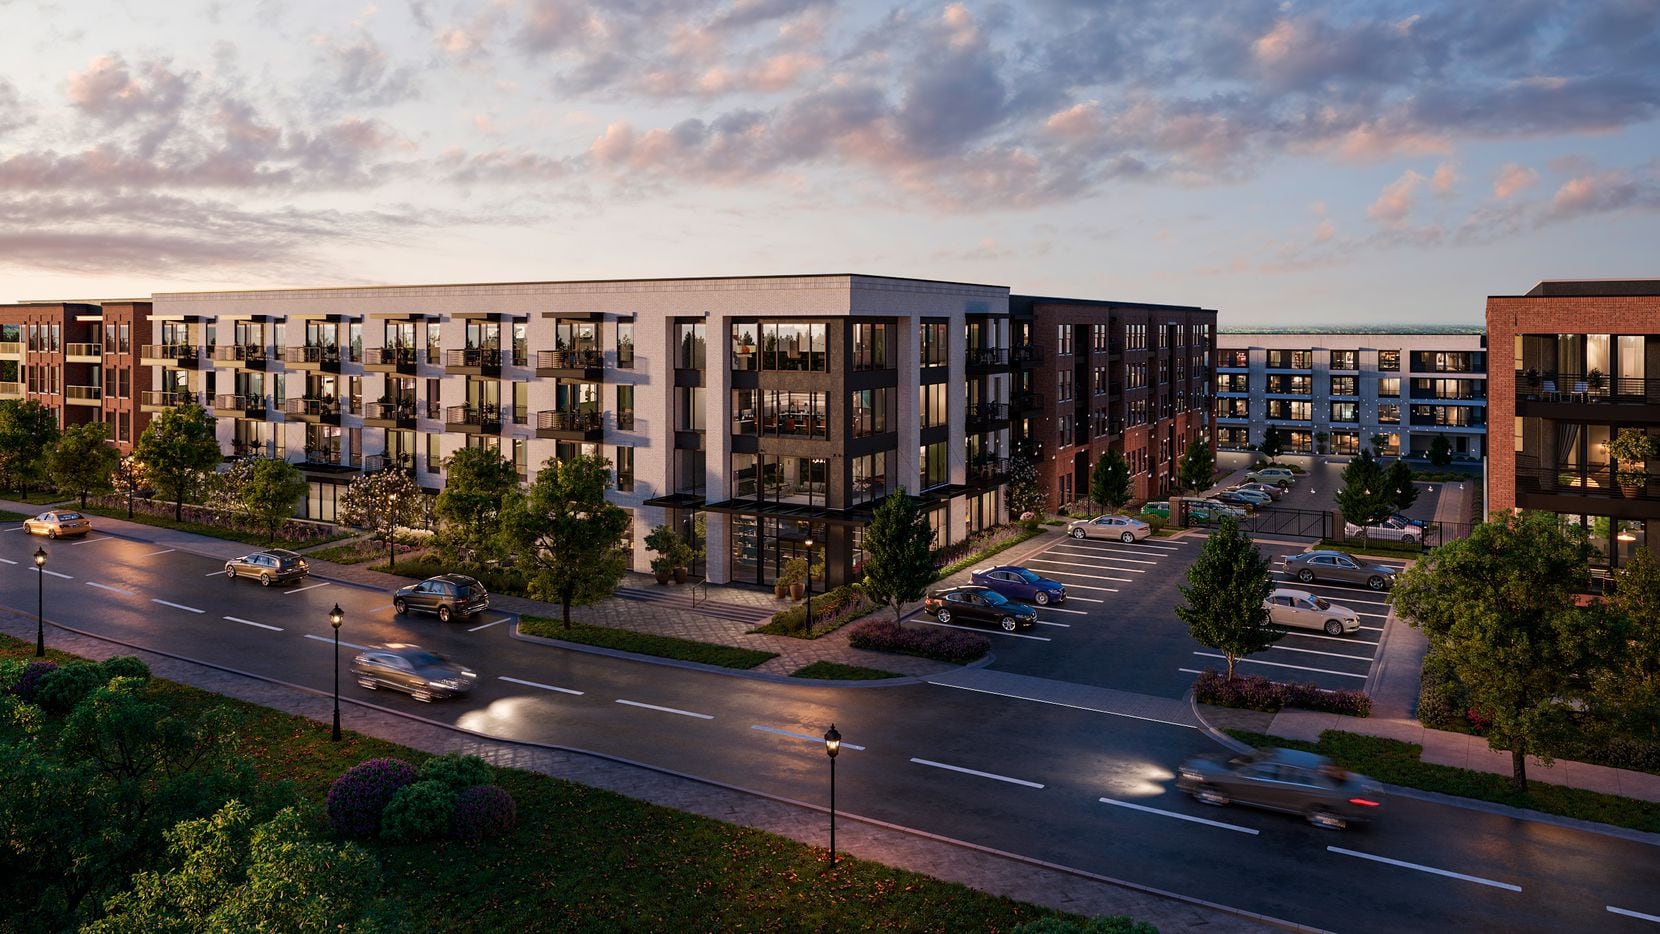 Apartment builder Toll Brothers is building the 420-unit Whitlow Apartments in Lewisville's...